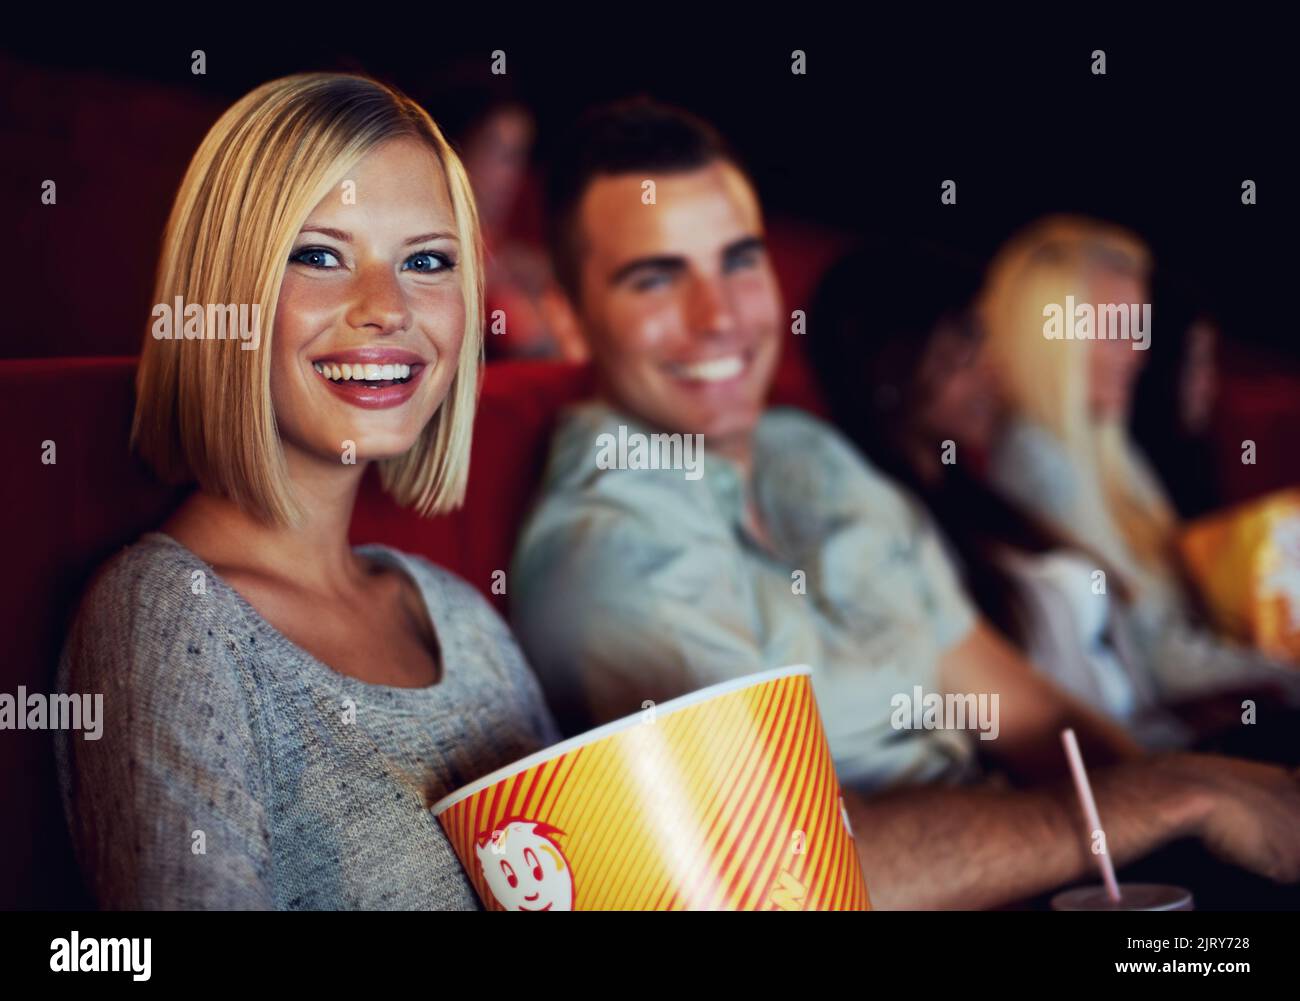 Movie, popcorn and smile with woman on a date with man at cinema interior or theater event. Happy, film or show screen with couple eating snacks and Stock Photo